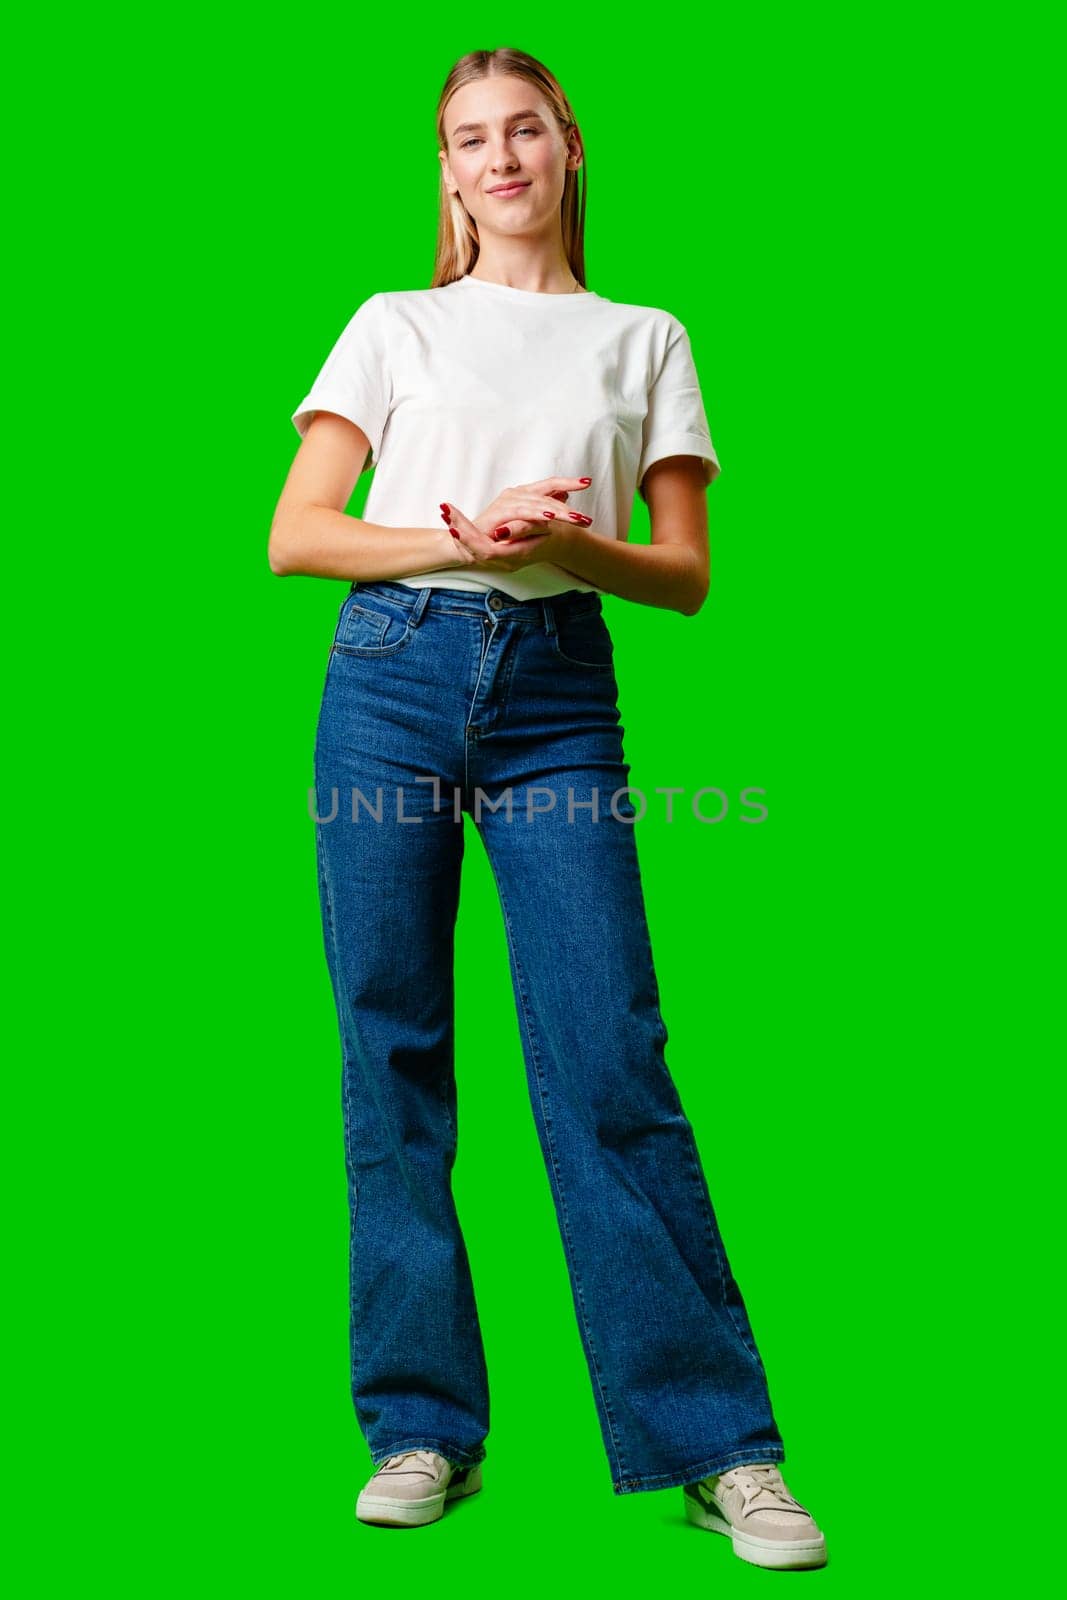 Young Woman in White Shirt Posing for Picture against green background in studio